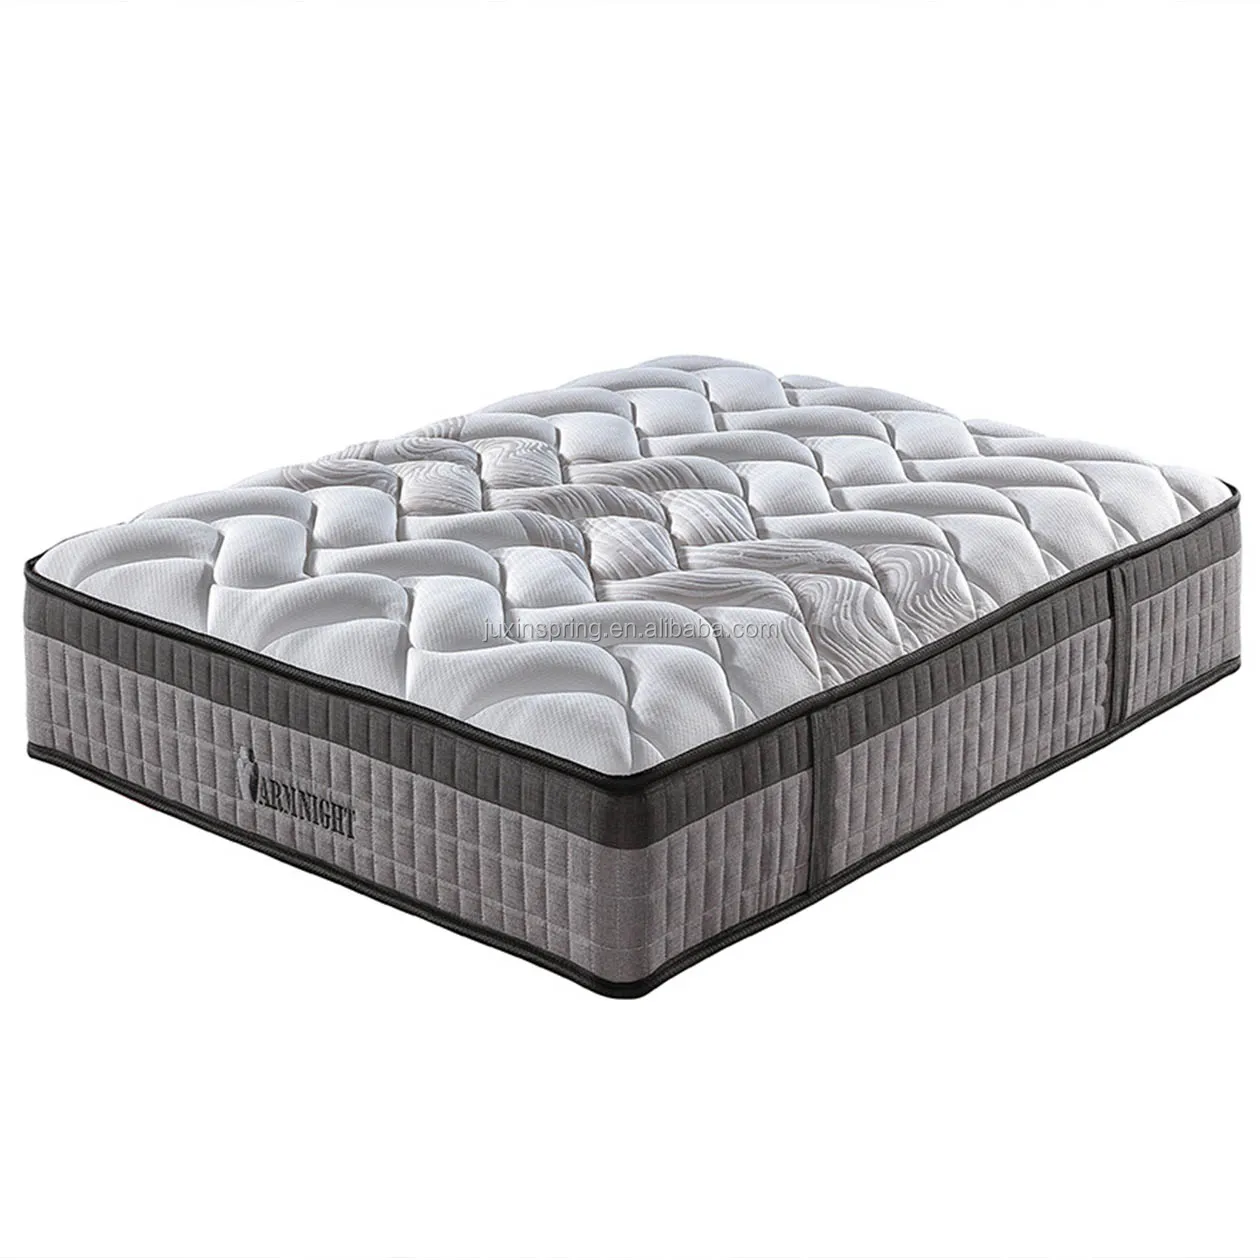 Korean Mattress Sizes Bed And Mattress Set With Accessories - Buy Bed ...